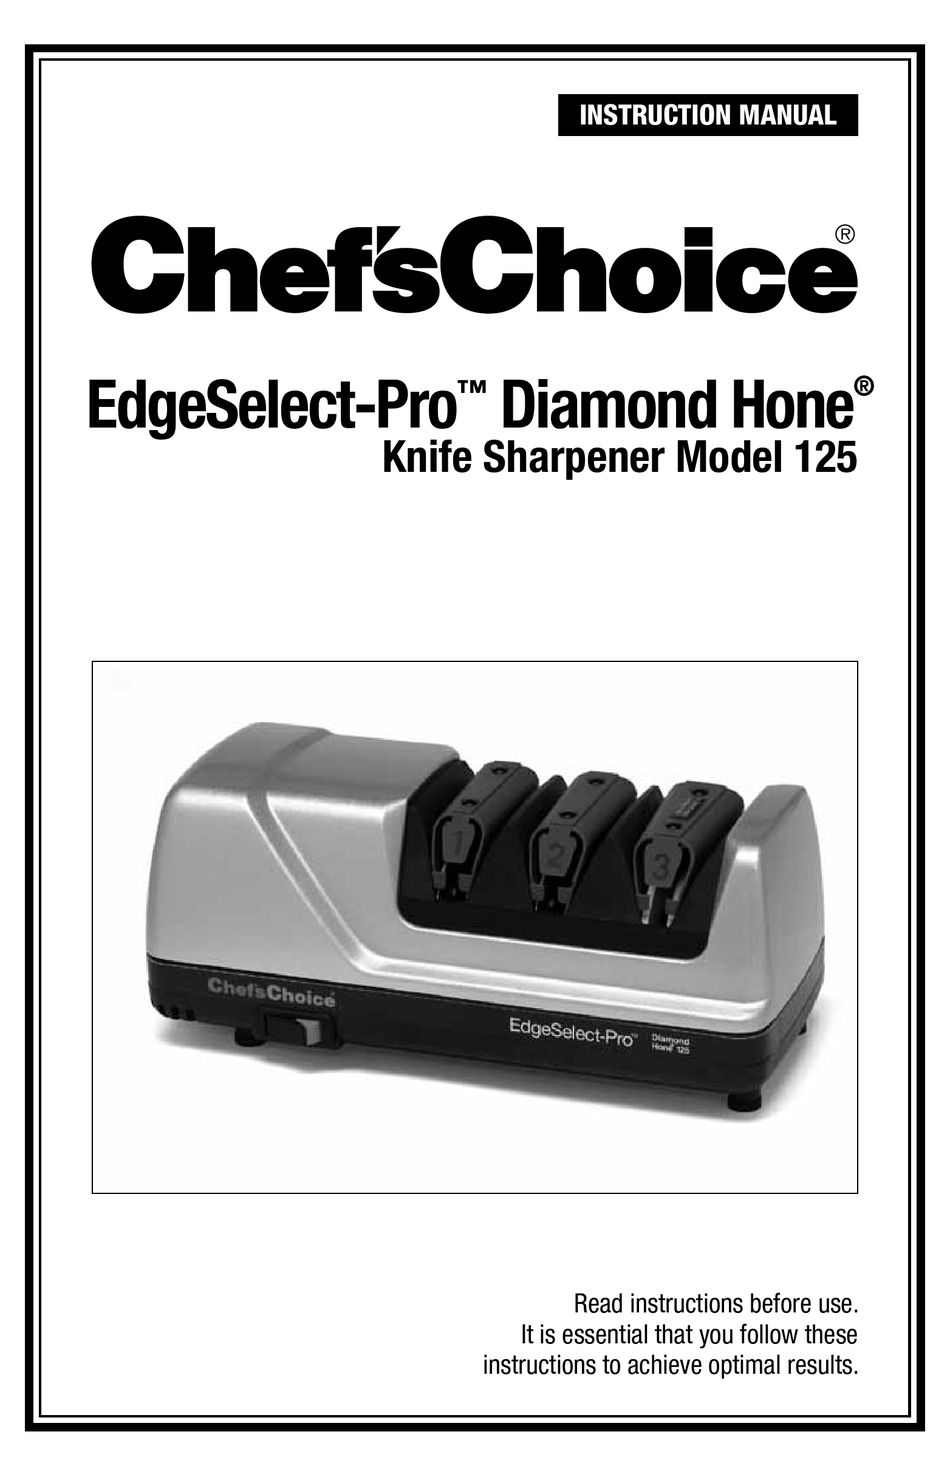 CHEF'S CHOICE TRIZOR XV INSTRUCTIONS FOR USE MANUAL Pdf Download